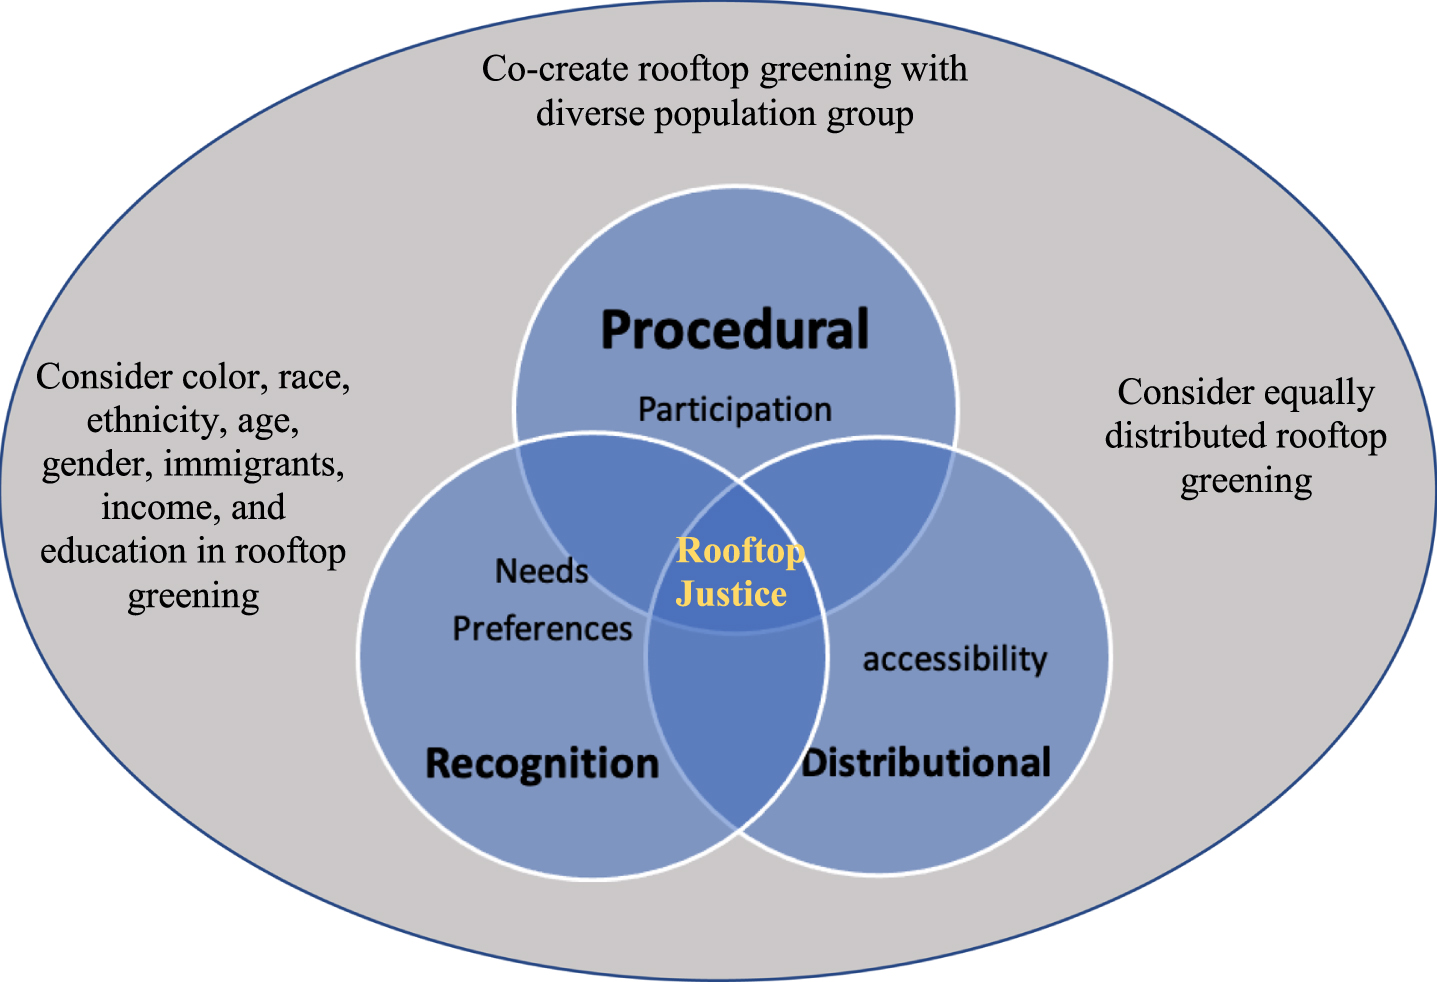 Conceptualizing rooftop provision justice through recognition, distribution, and procedure (RDP) analysis.